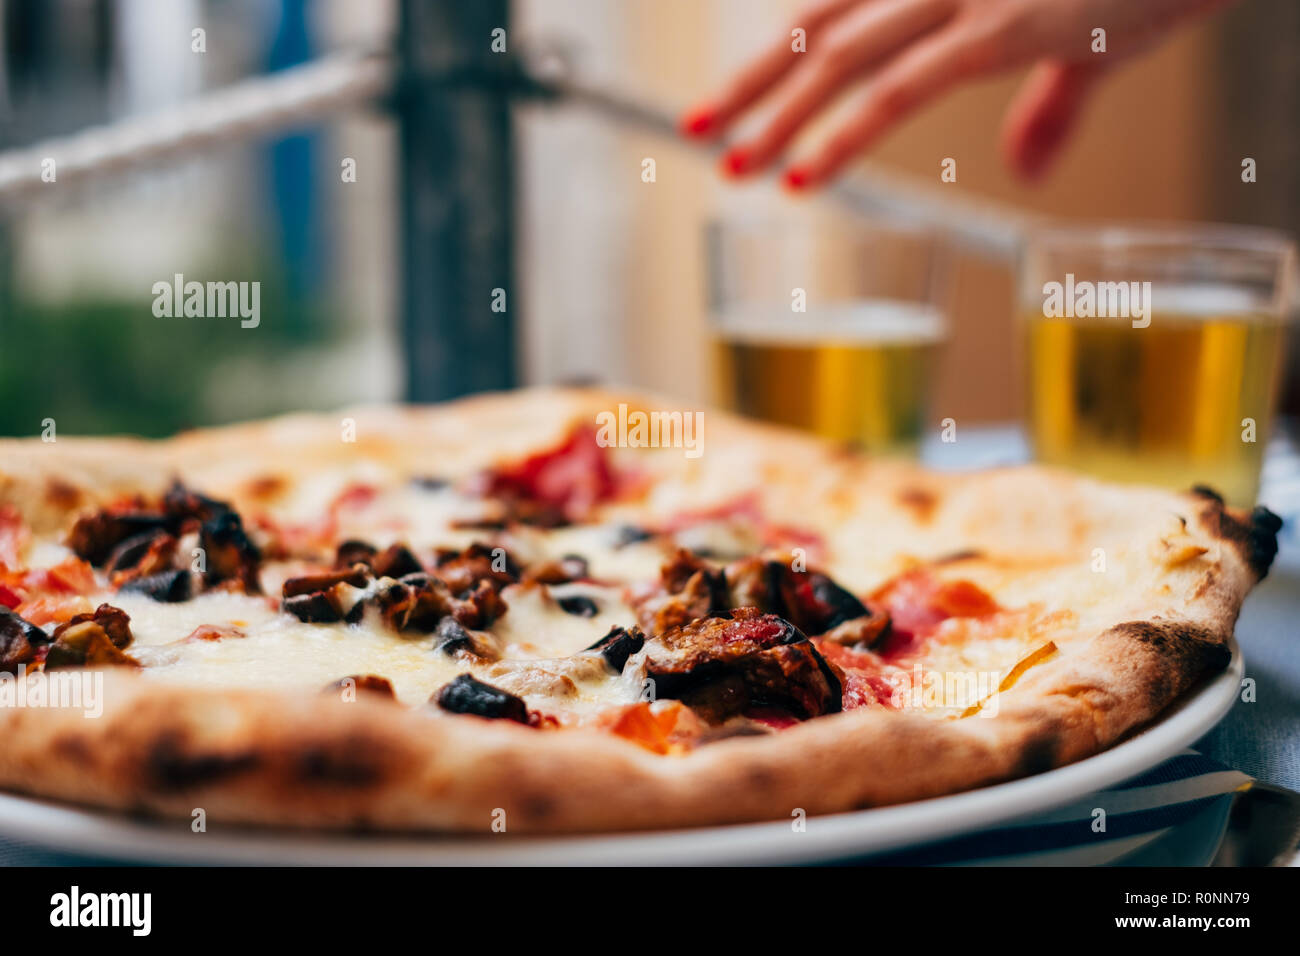 Aubergine pizza on a table and a woman's hand reaching for a beer Stock Photo